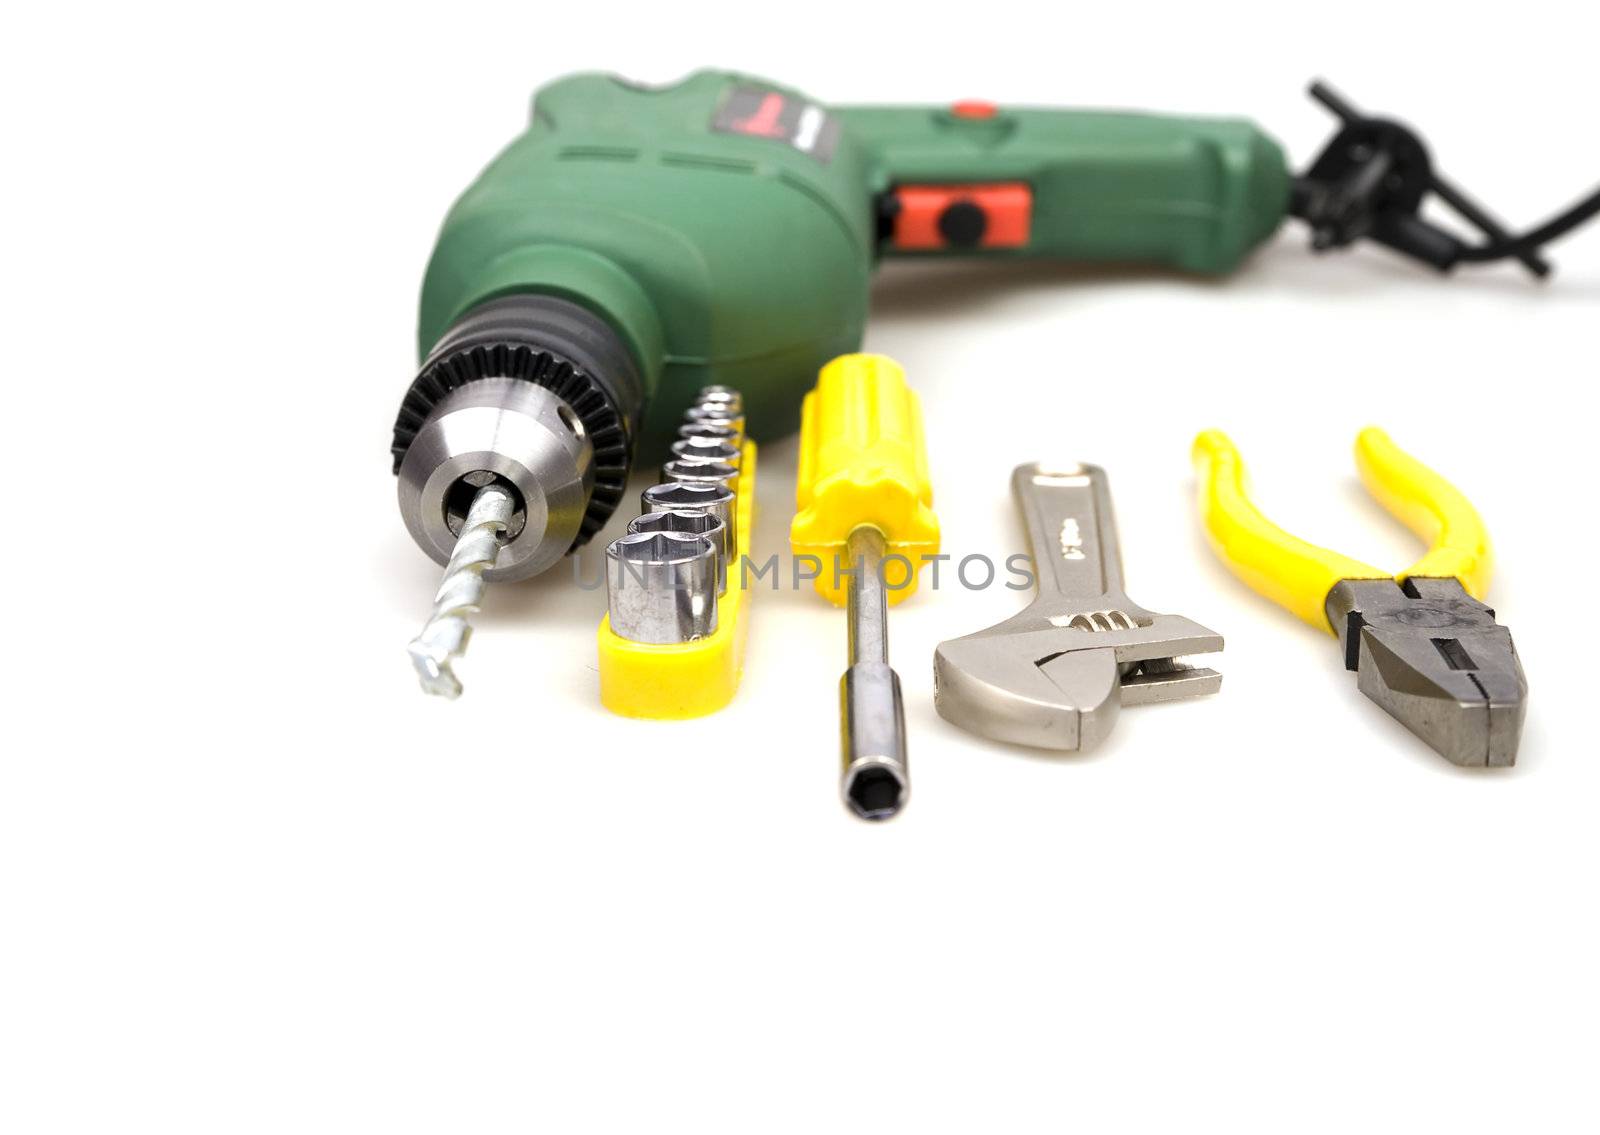 drill and other tools isolated on a white background